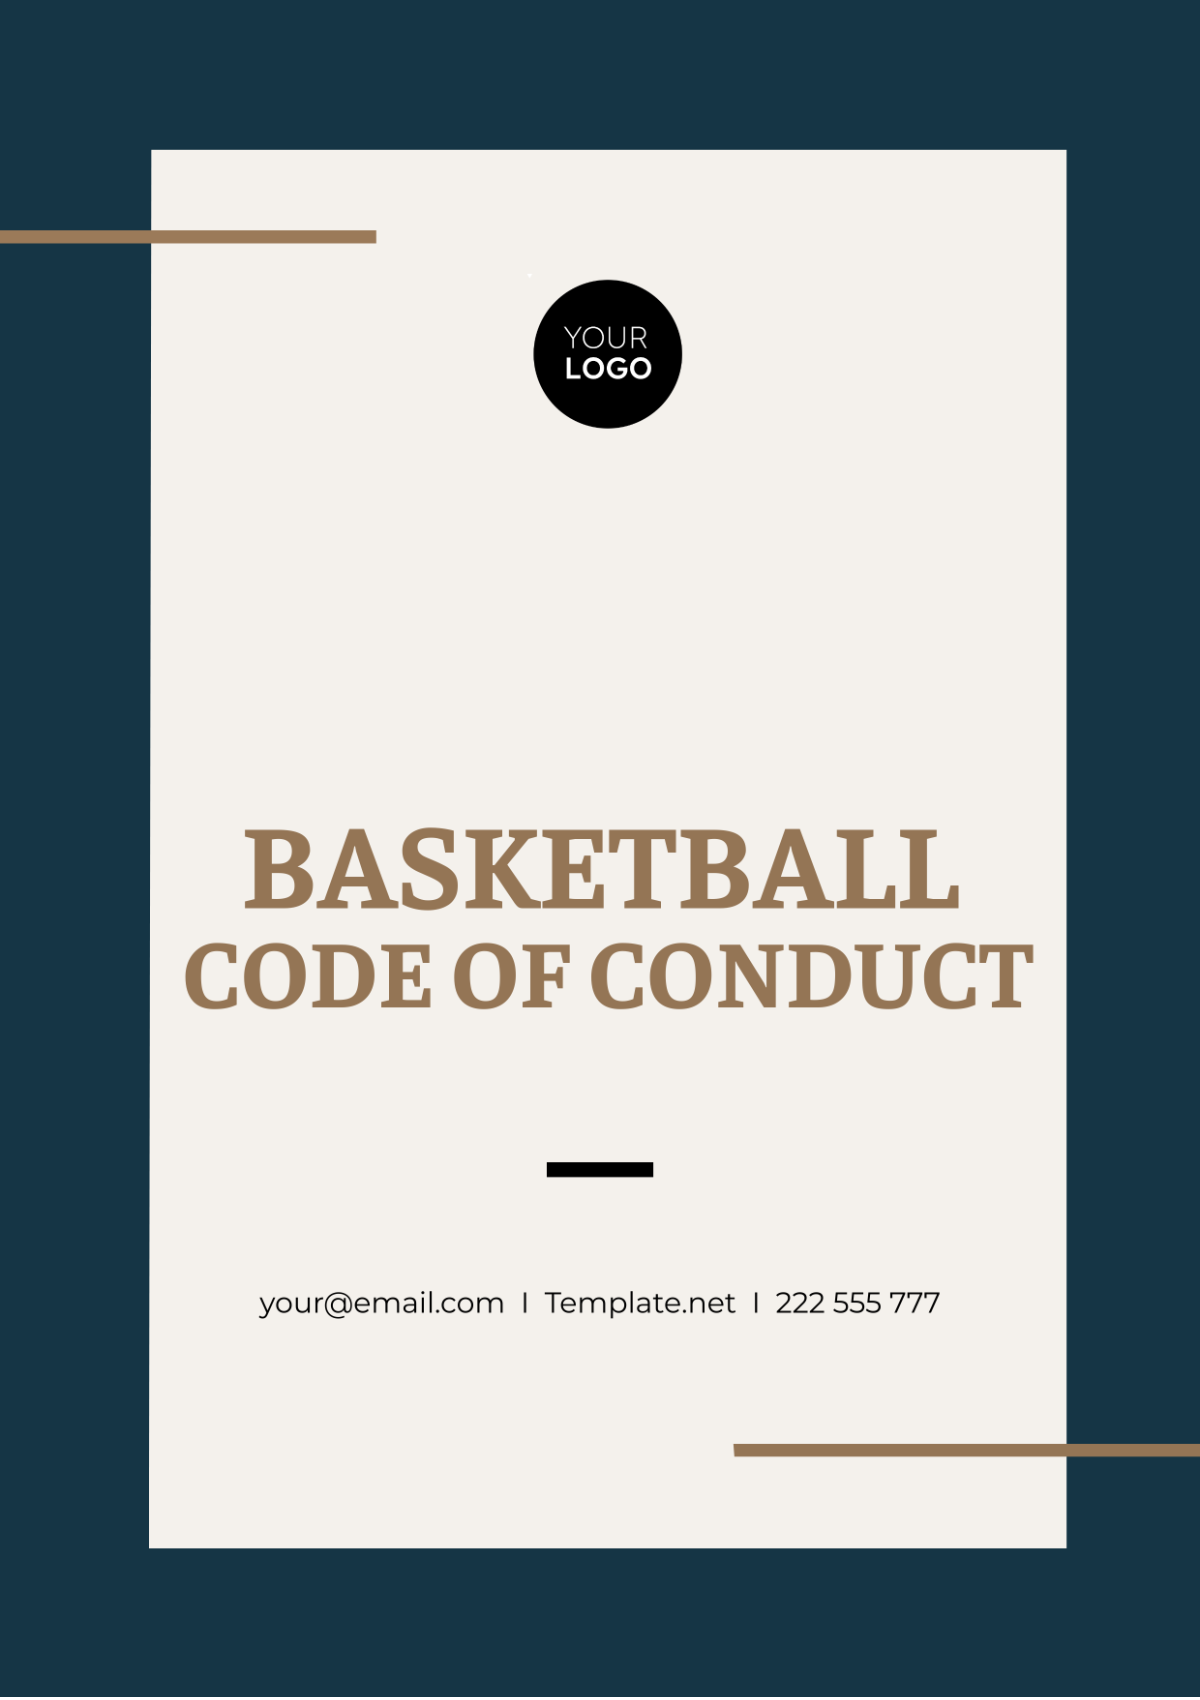 Basketball Code of Conduct Template